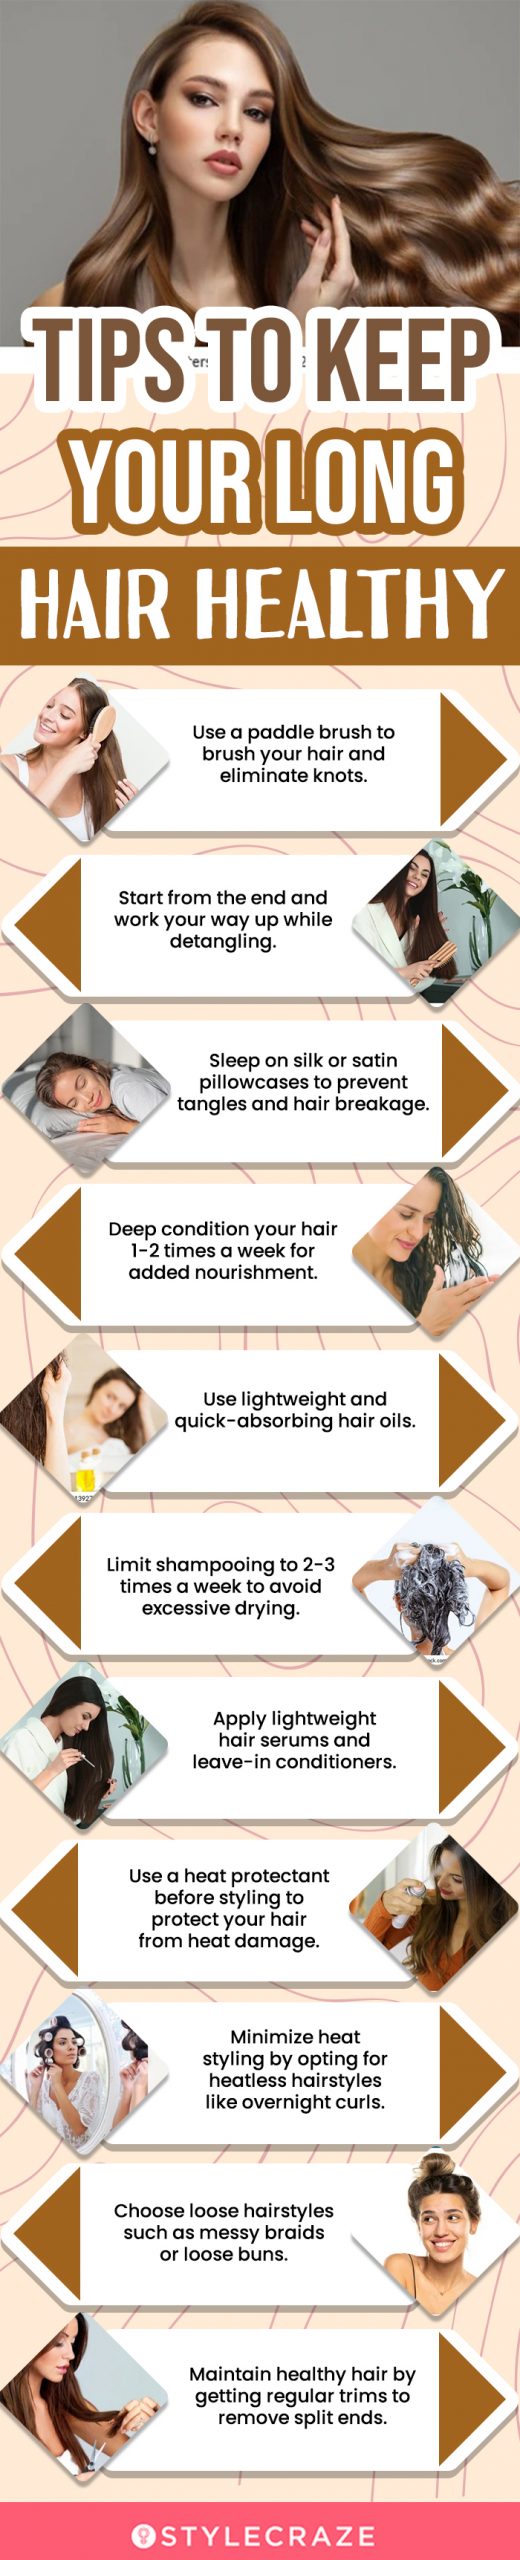 Tips To Keep Your Long Hair Healthy (infographic)